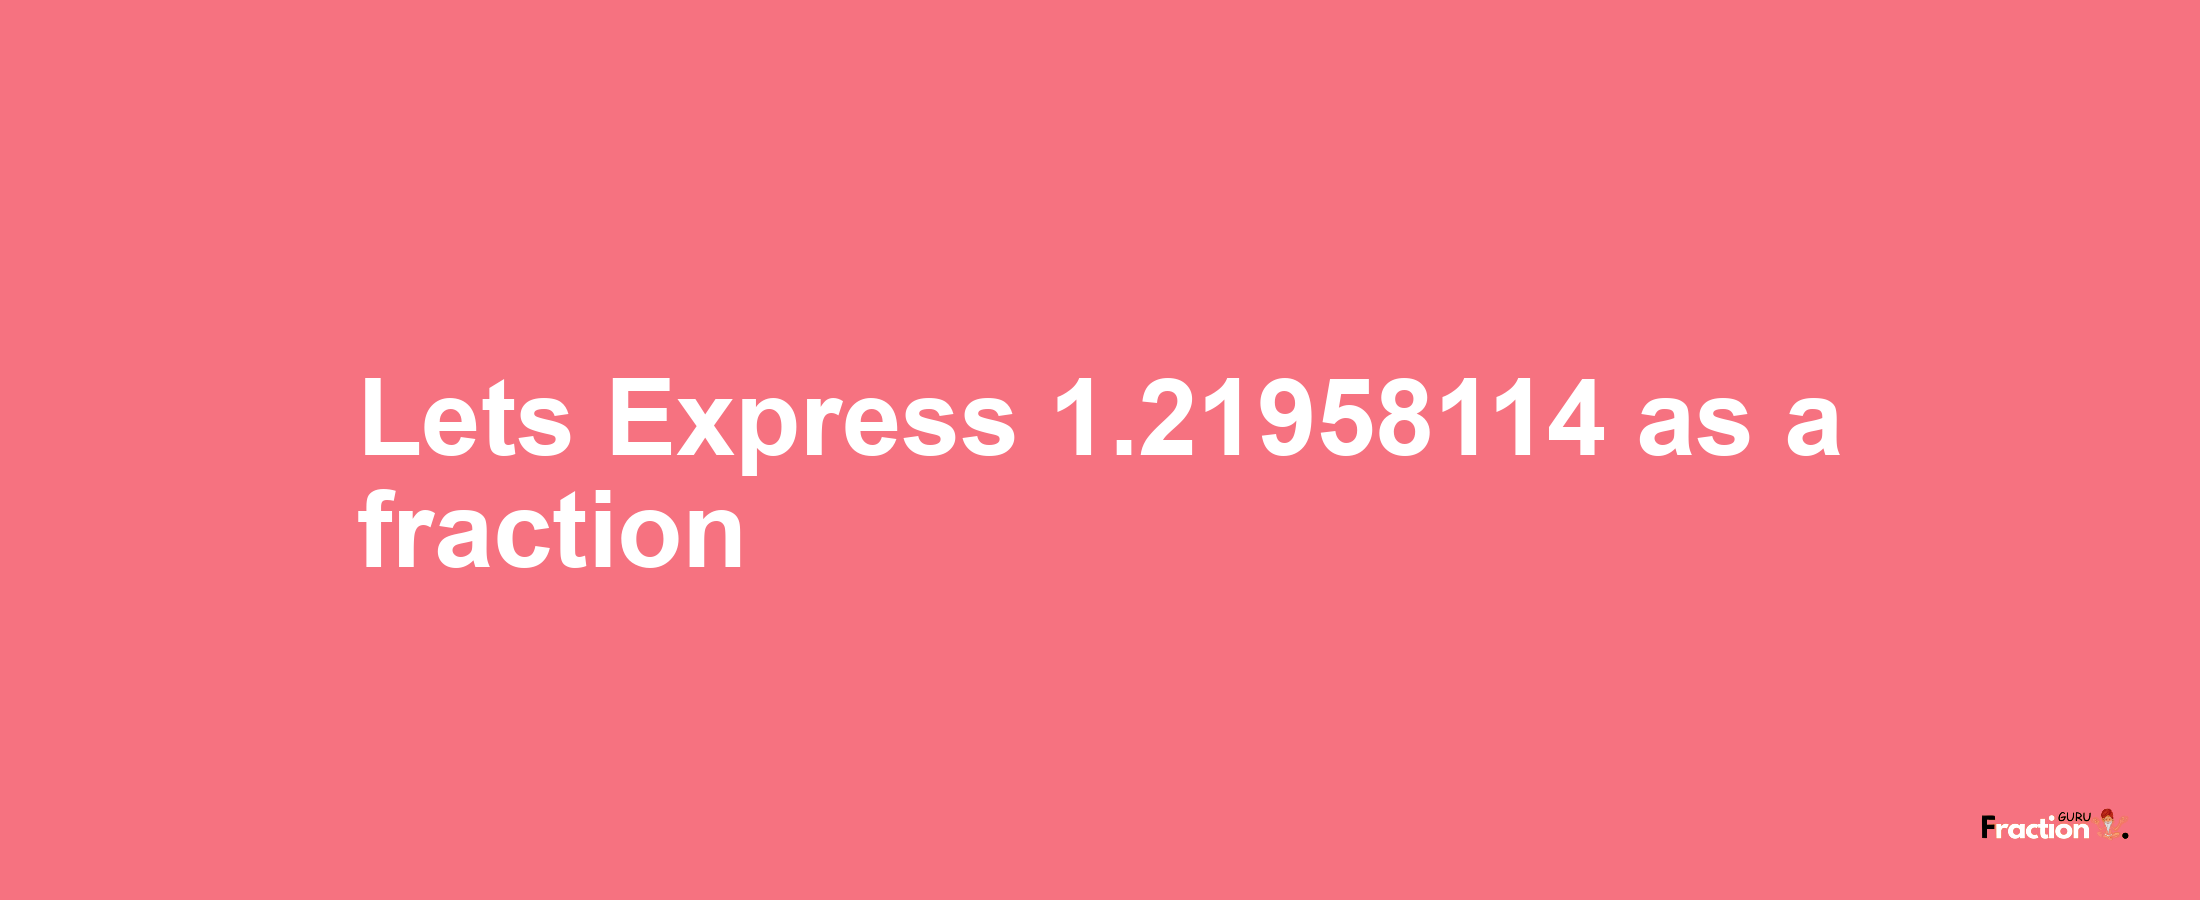 Lets Express 1.21958114 as afraction